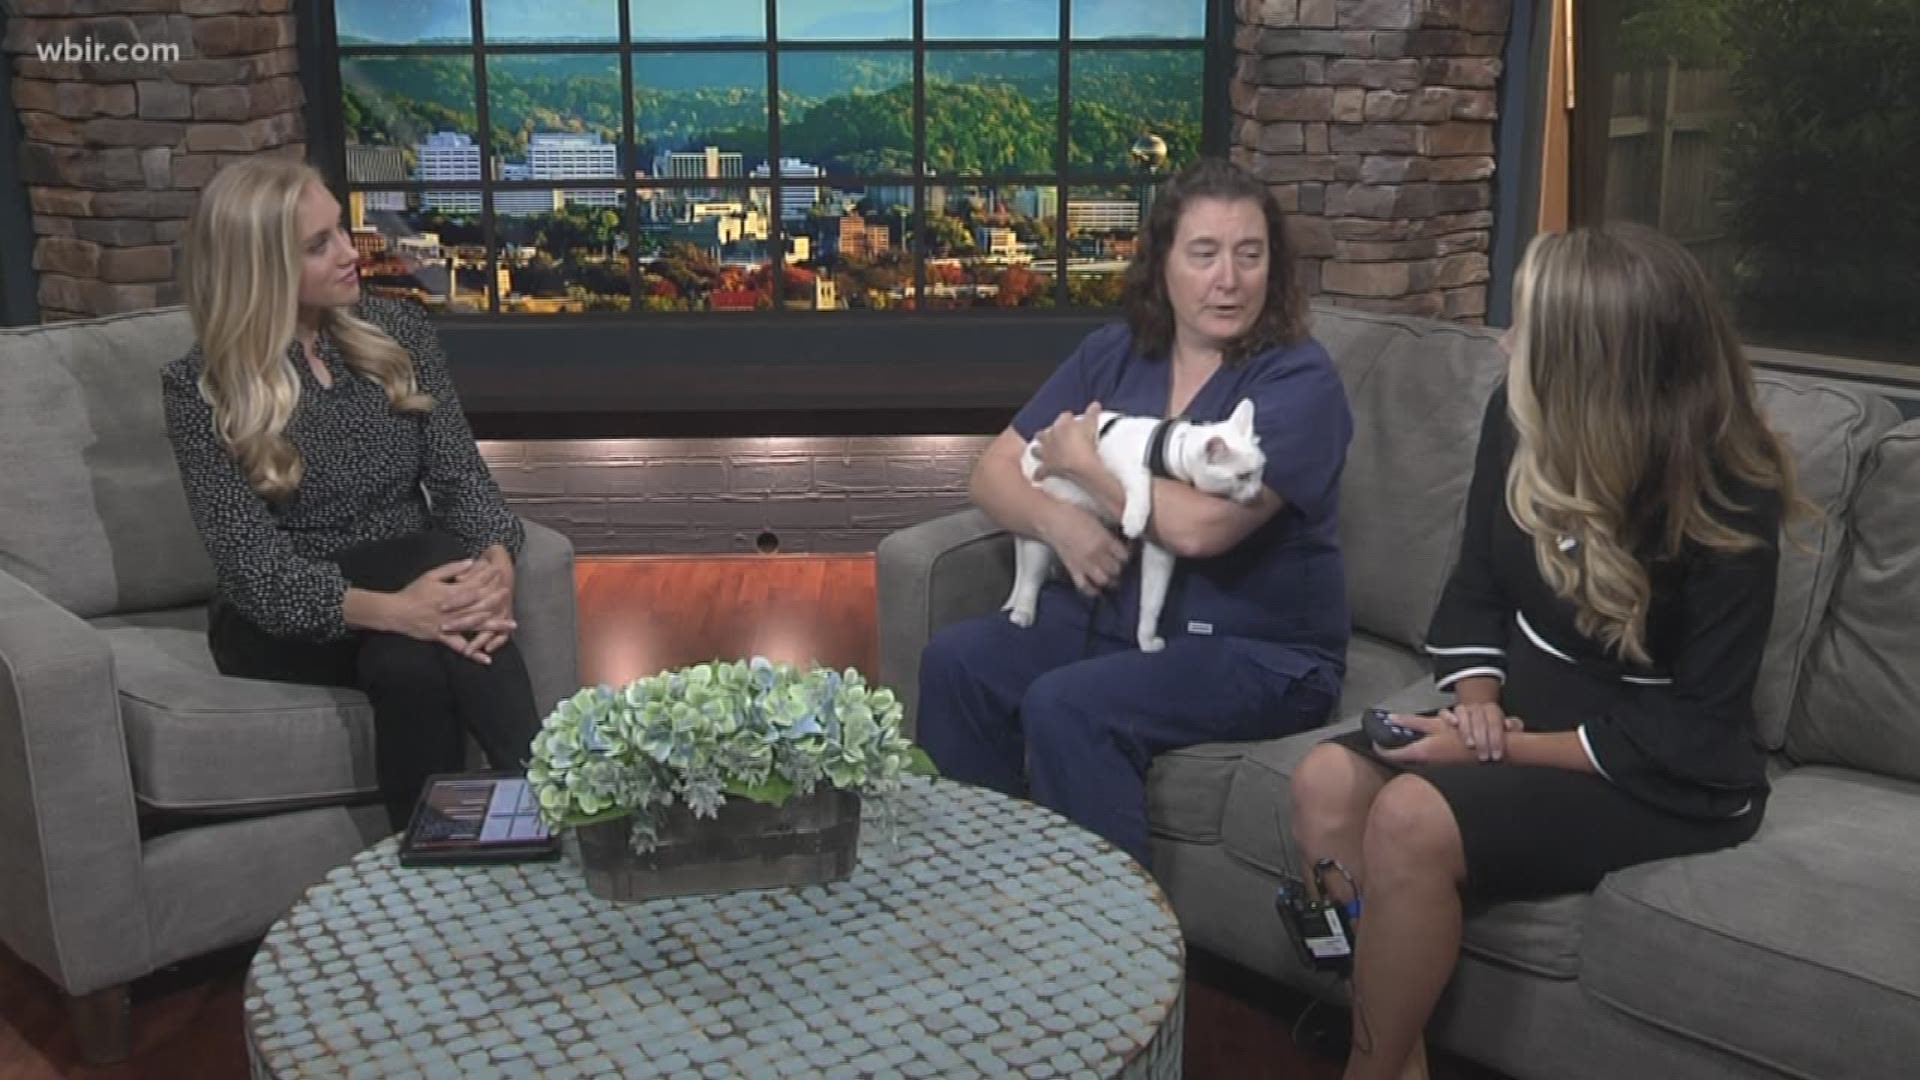 Dr. Lisa Chassy from Young-Williams Animal Center introduces us to a furry friend up for adoption and talks about kitten season at the center.